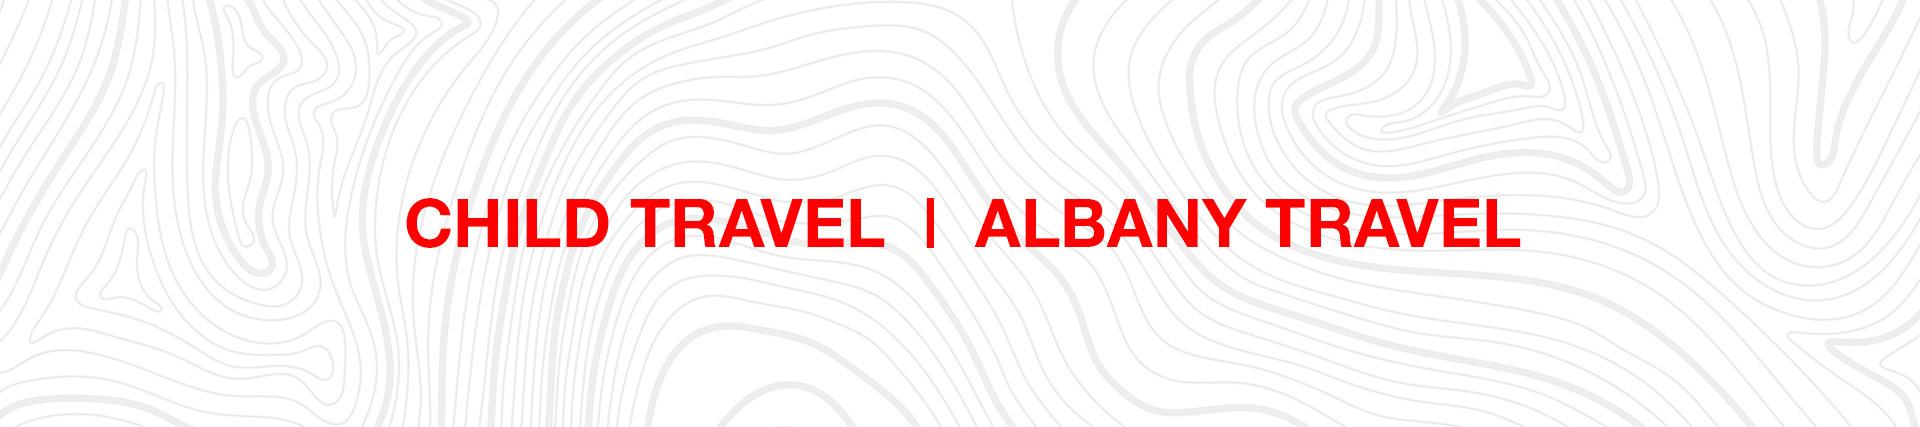 Direct Travel, Inc. Announces Agreement to Acquire Child Travel | Albany Travel